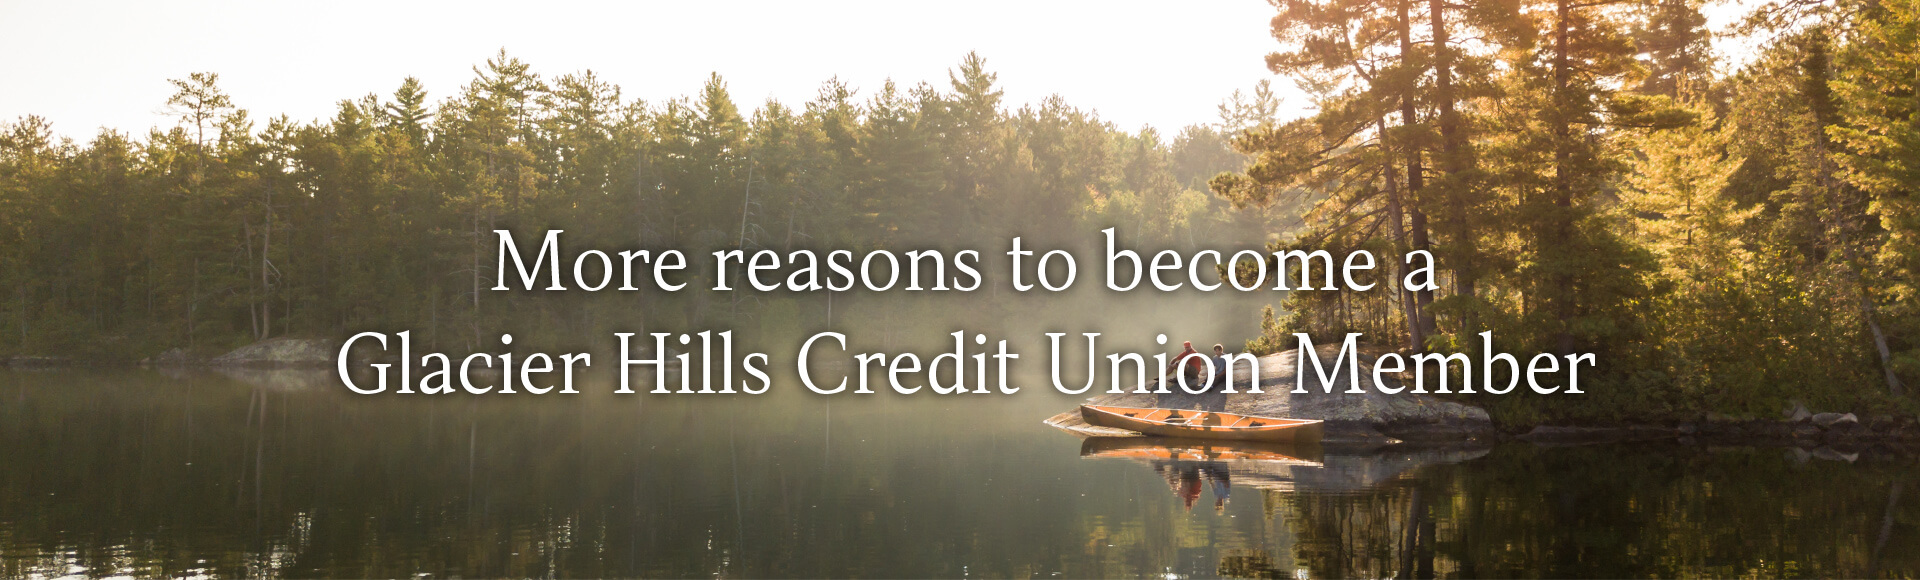 More reasons to become a Glacier Hills Credit Union Member